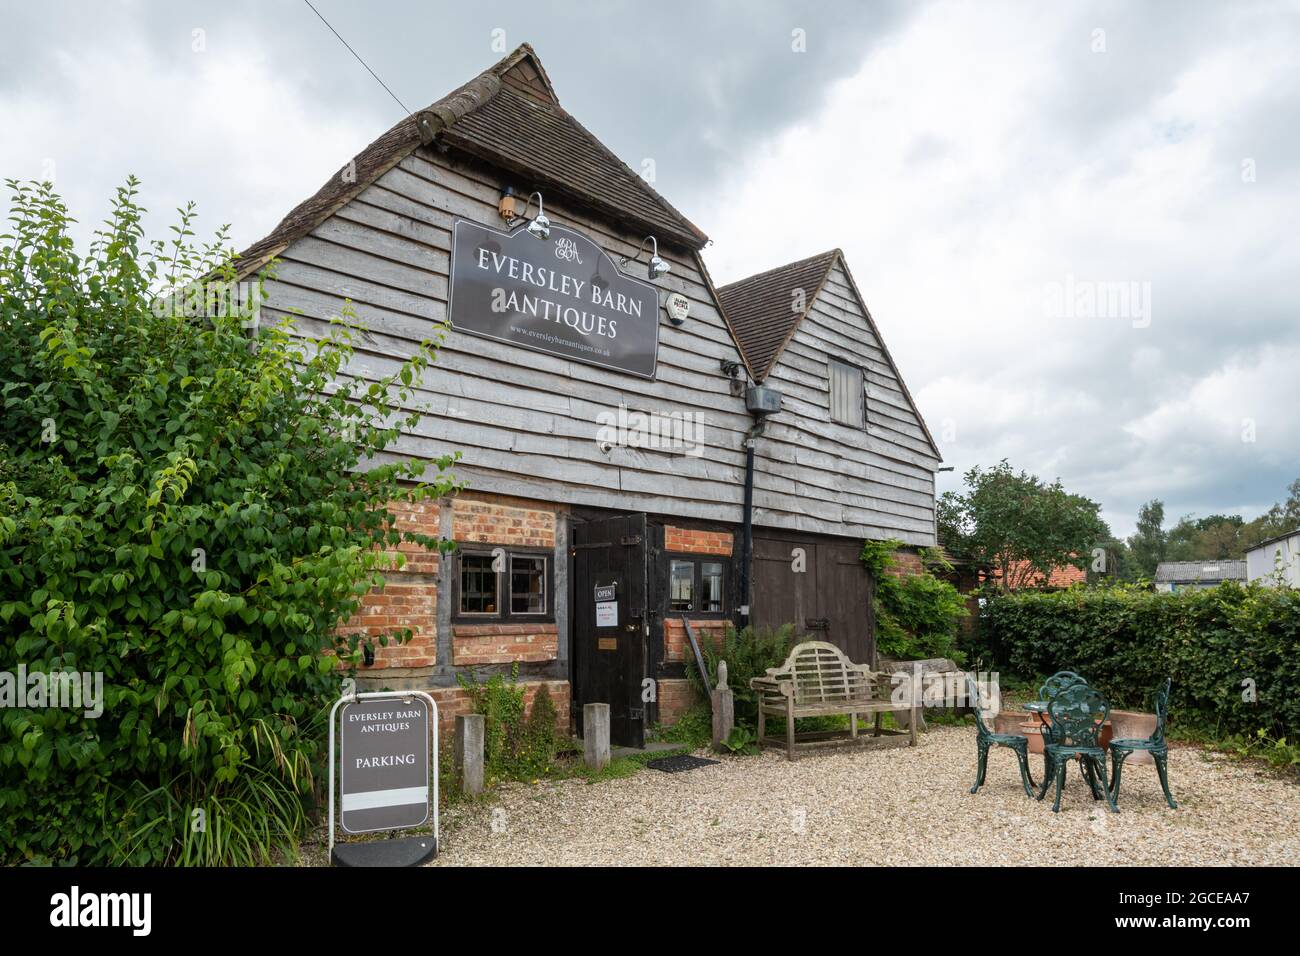 Eversley Barn Antiques, an antique shop located in a 16th century barn in the Hampshire village of Eversley, England, UK Stock Photo